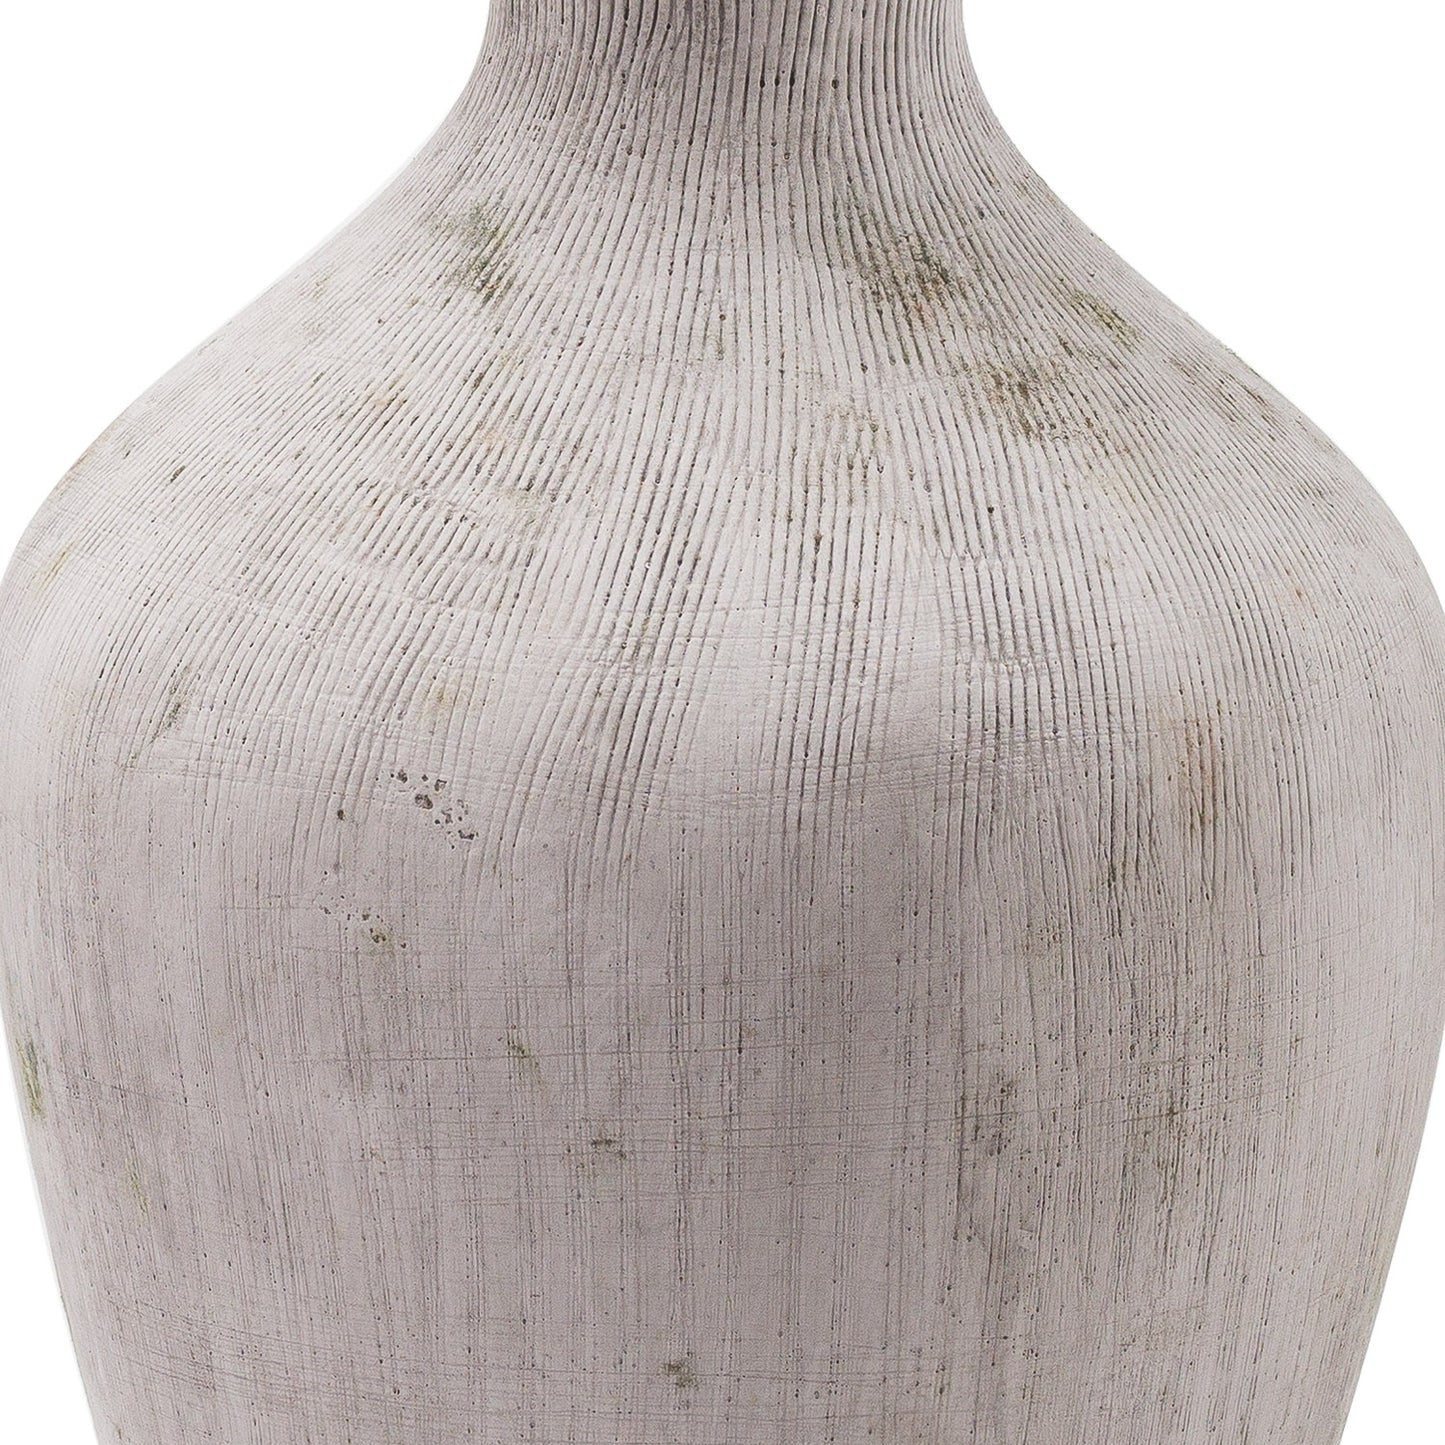 Matt Grey Ceramic Boulbous Fluted Neck Vase With Earthy Distressed Texture – Click Style